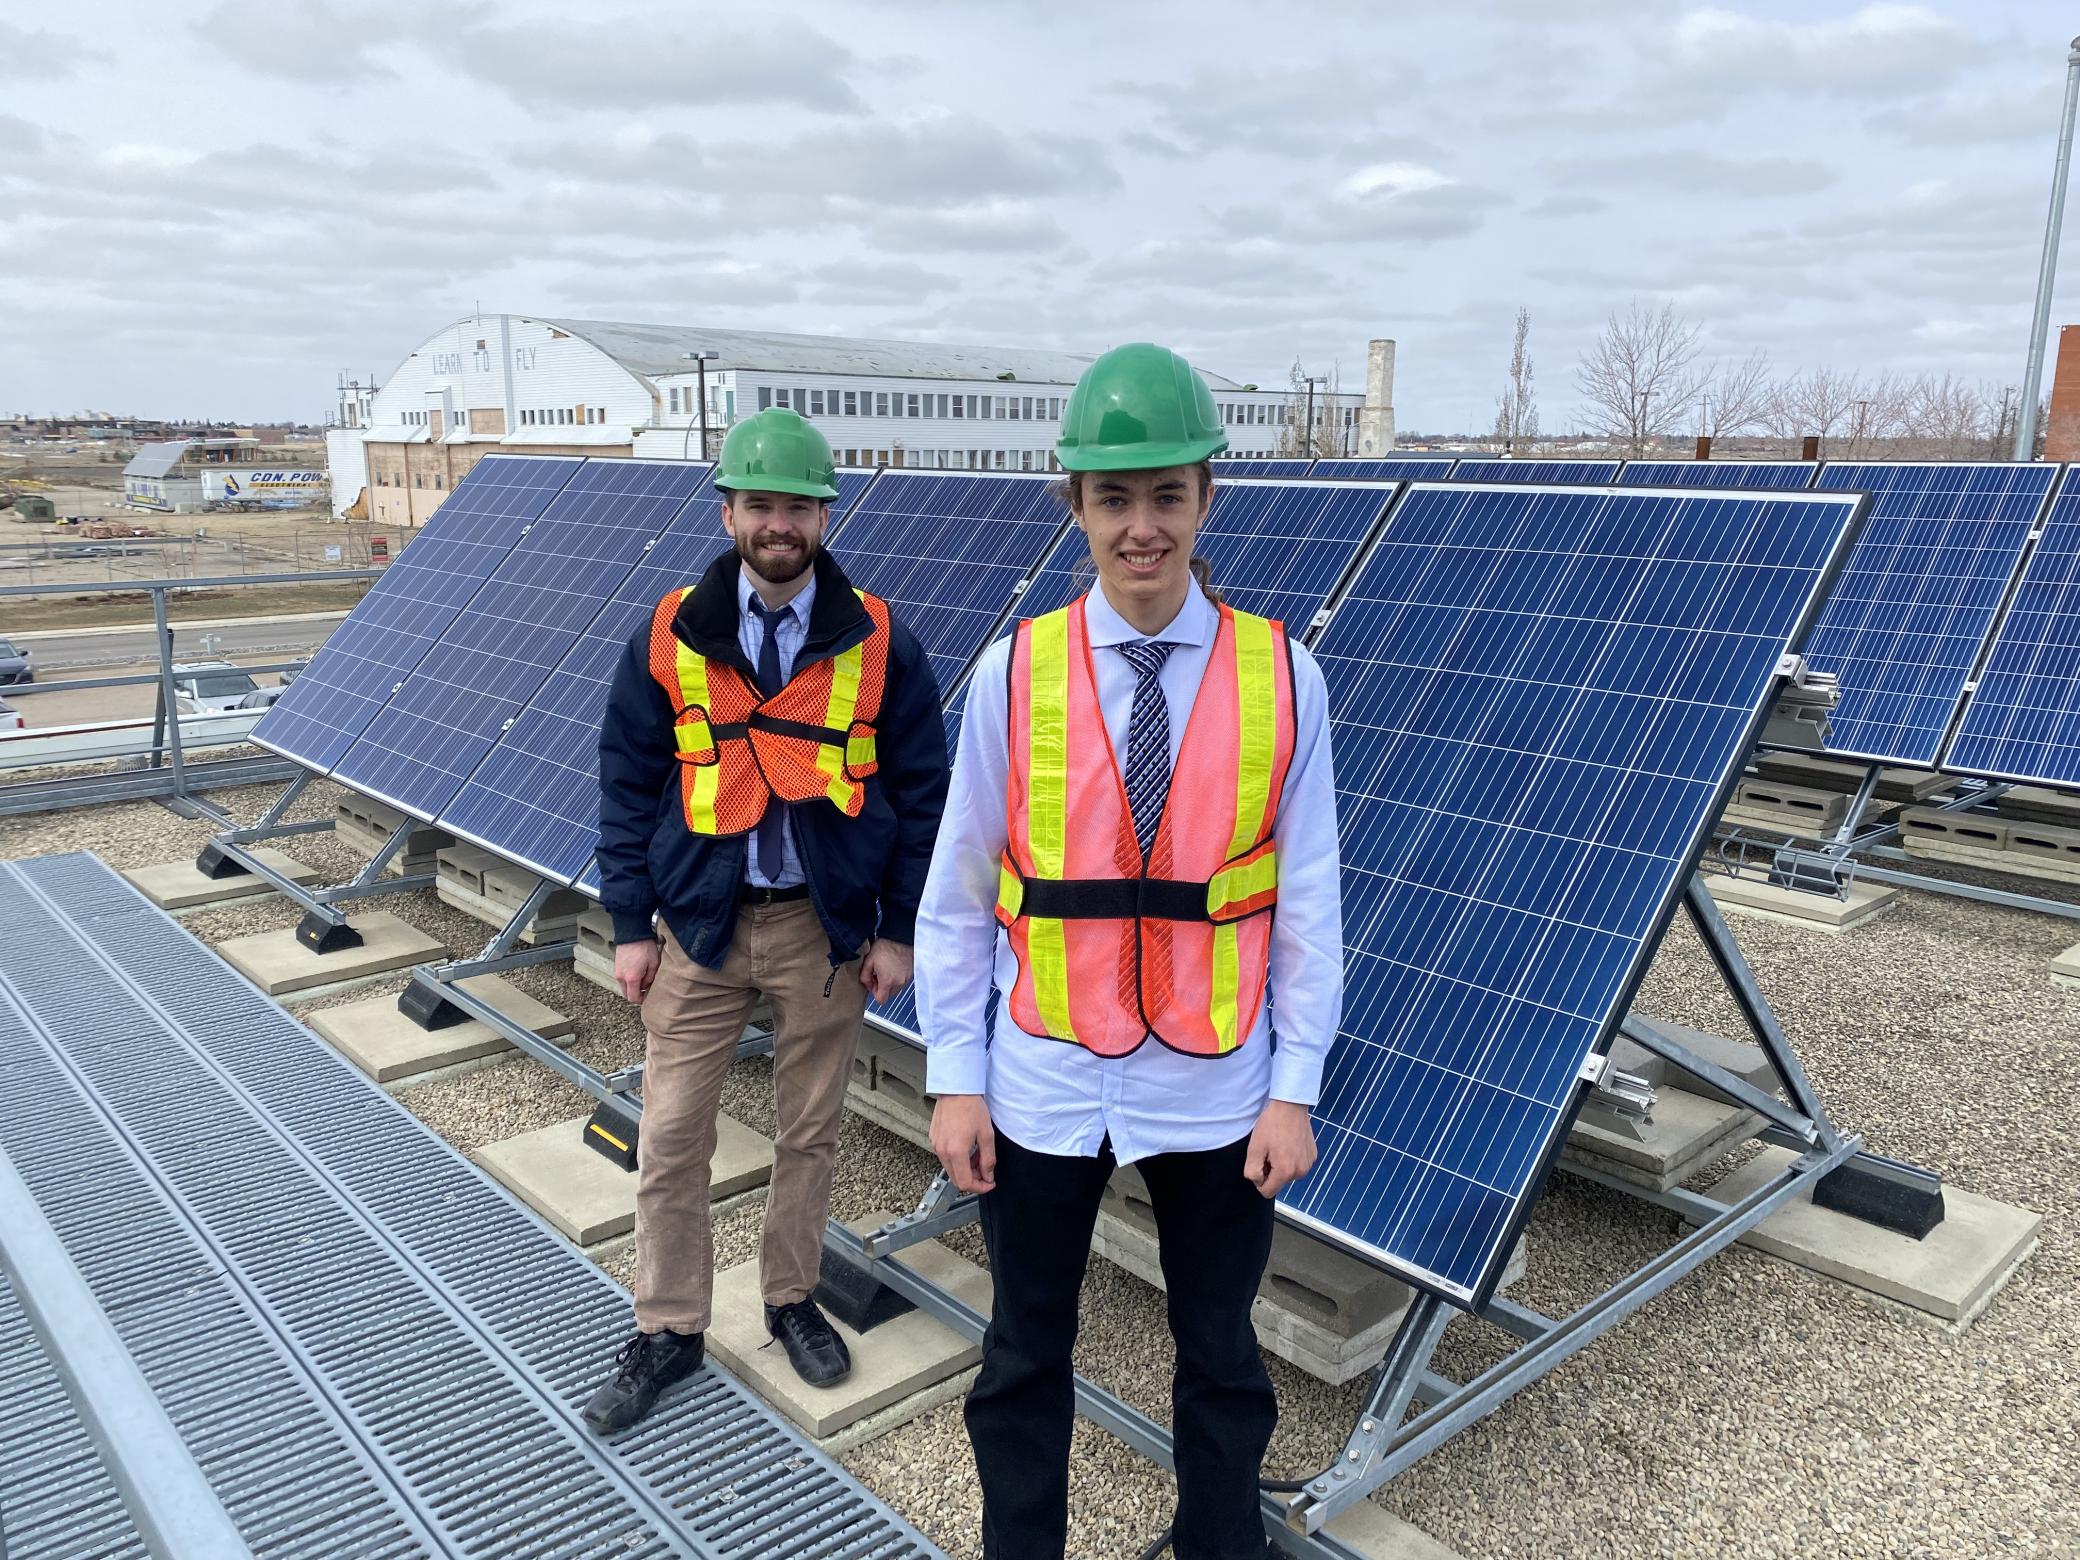 NAIT students Jack Harding and Ethan Buchanan standing in safety gear in front of the solar panels on a roof.